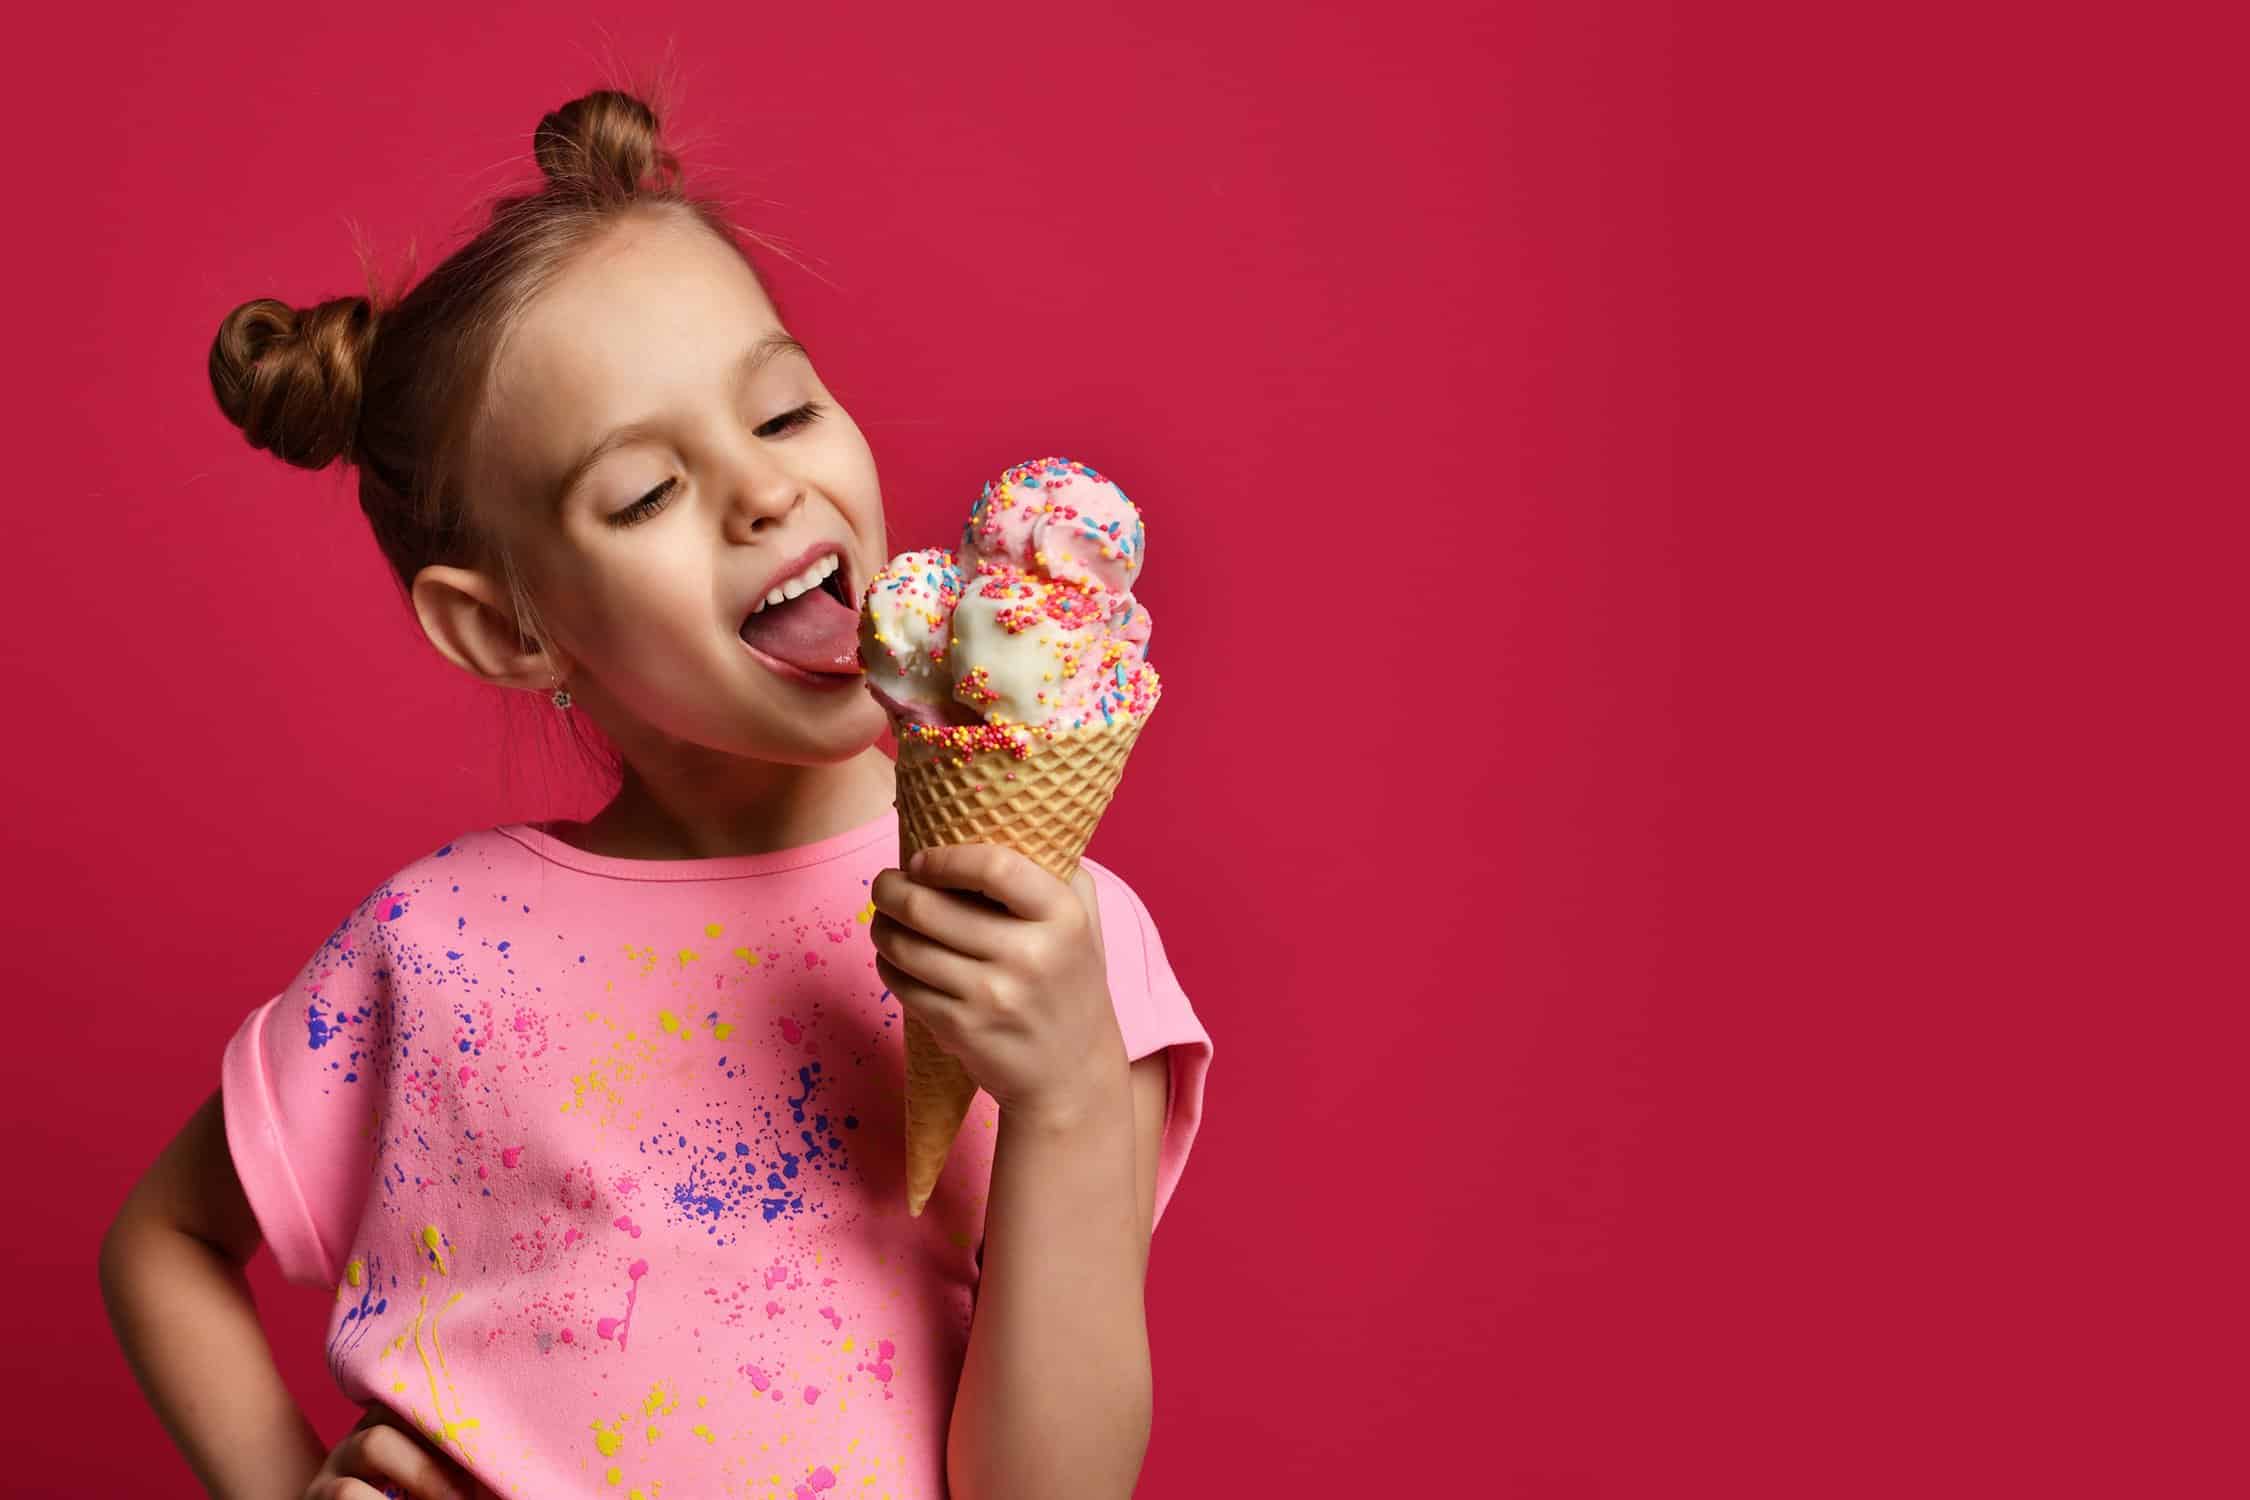 Pretty Baby Girl Kid Eating Licking Big Ice Cream In Waffles Cone With